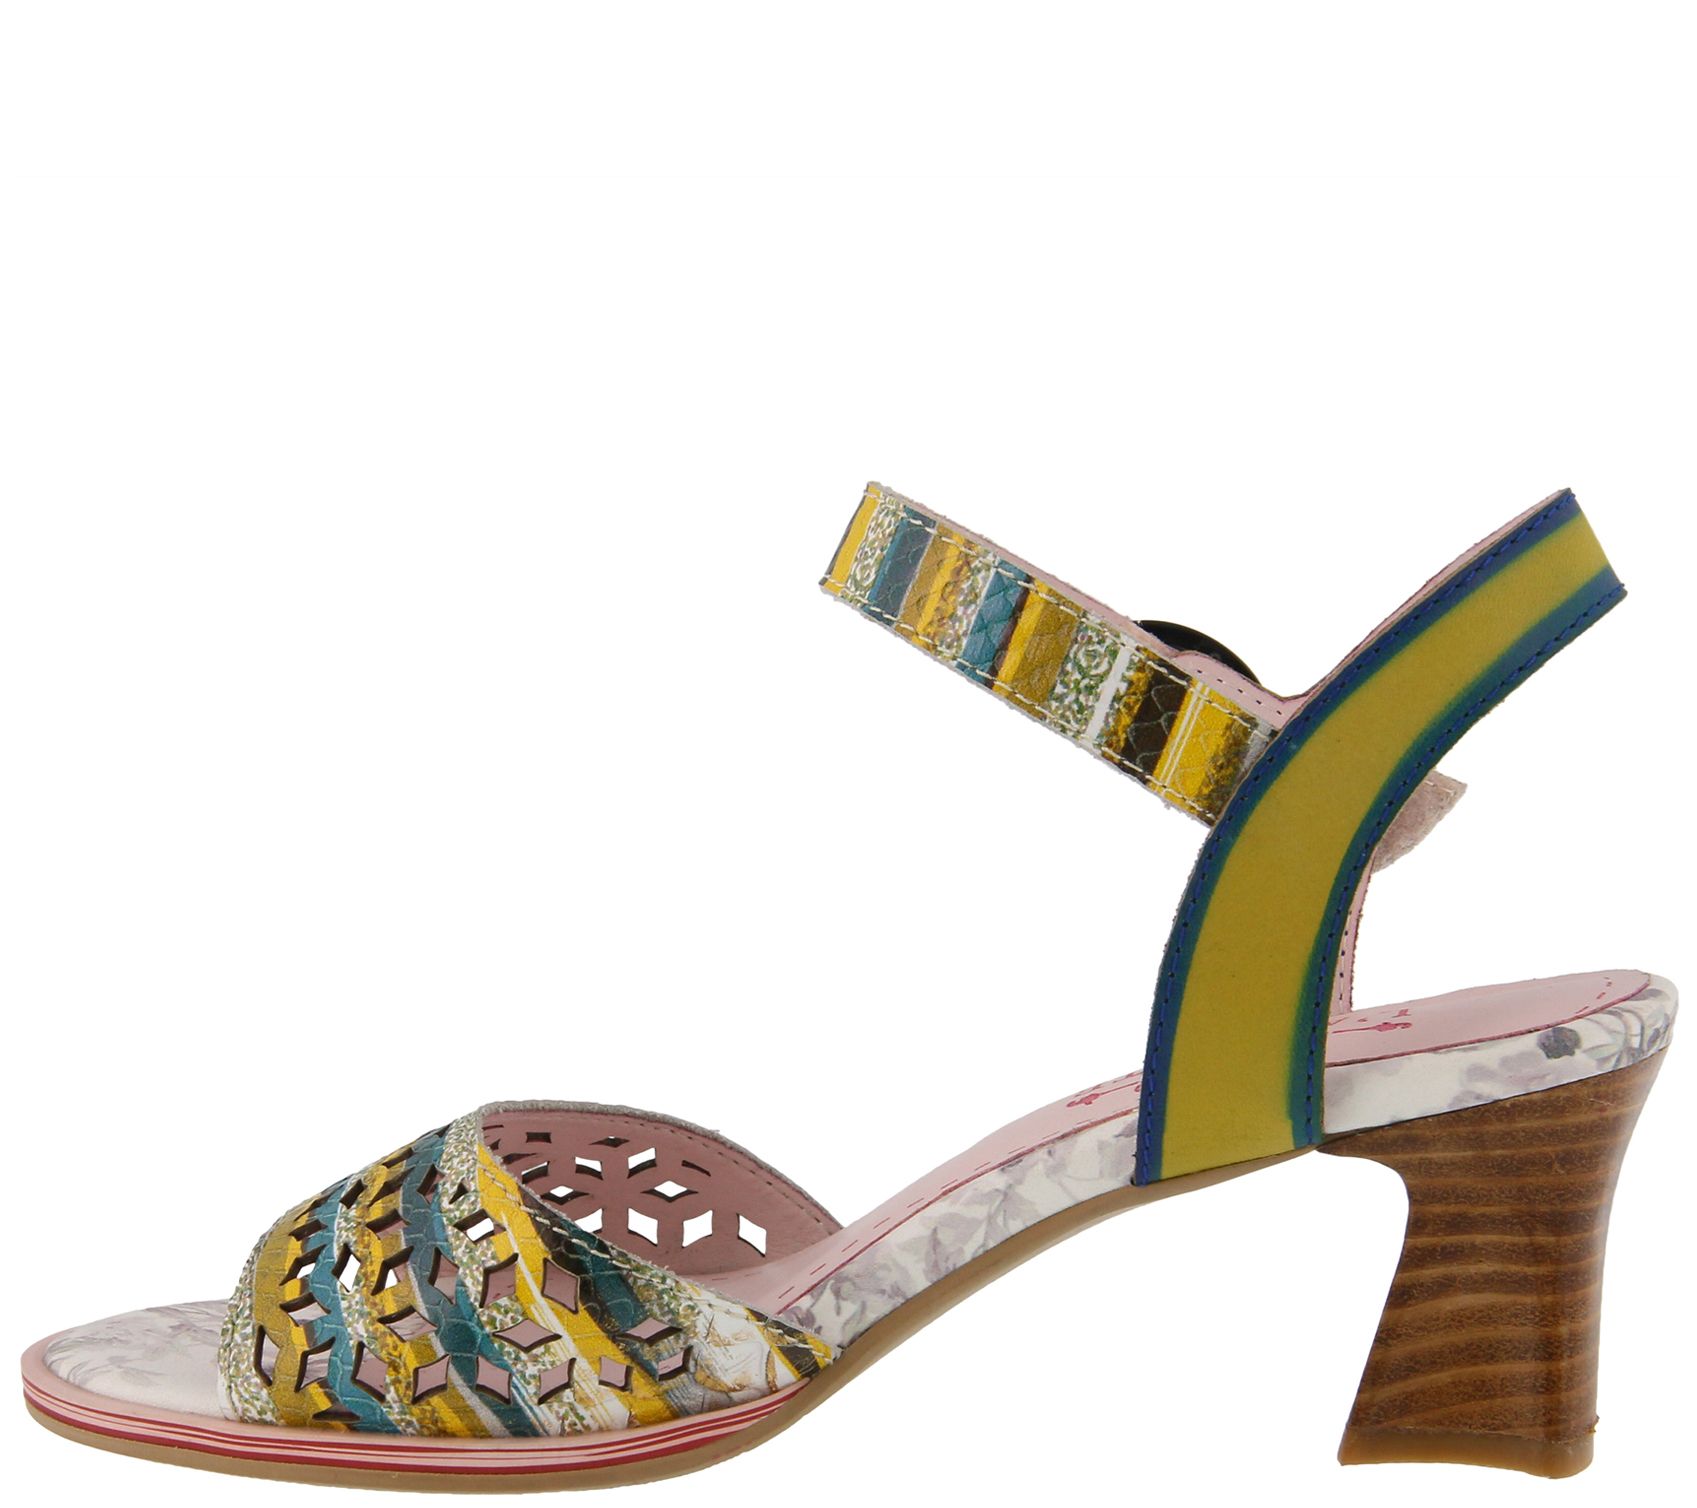 L'Artiste by Spring Step Leather Ankle Strap Sandals - Madelyn - QVC.com